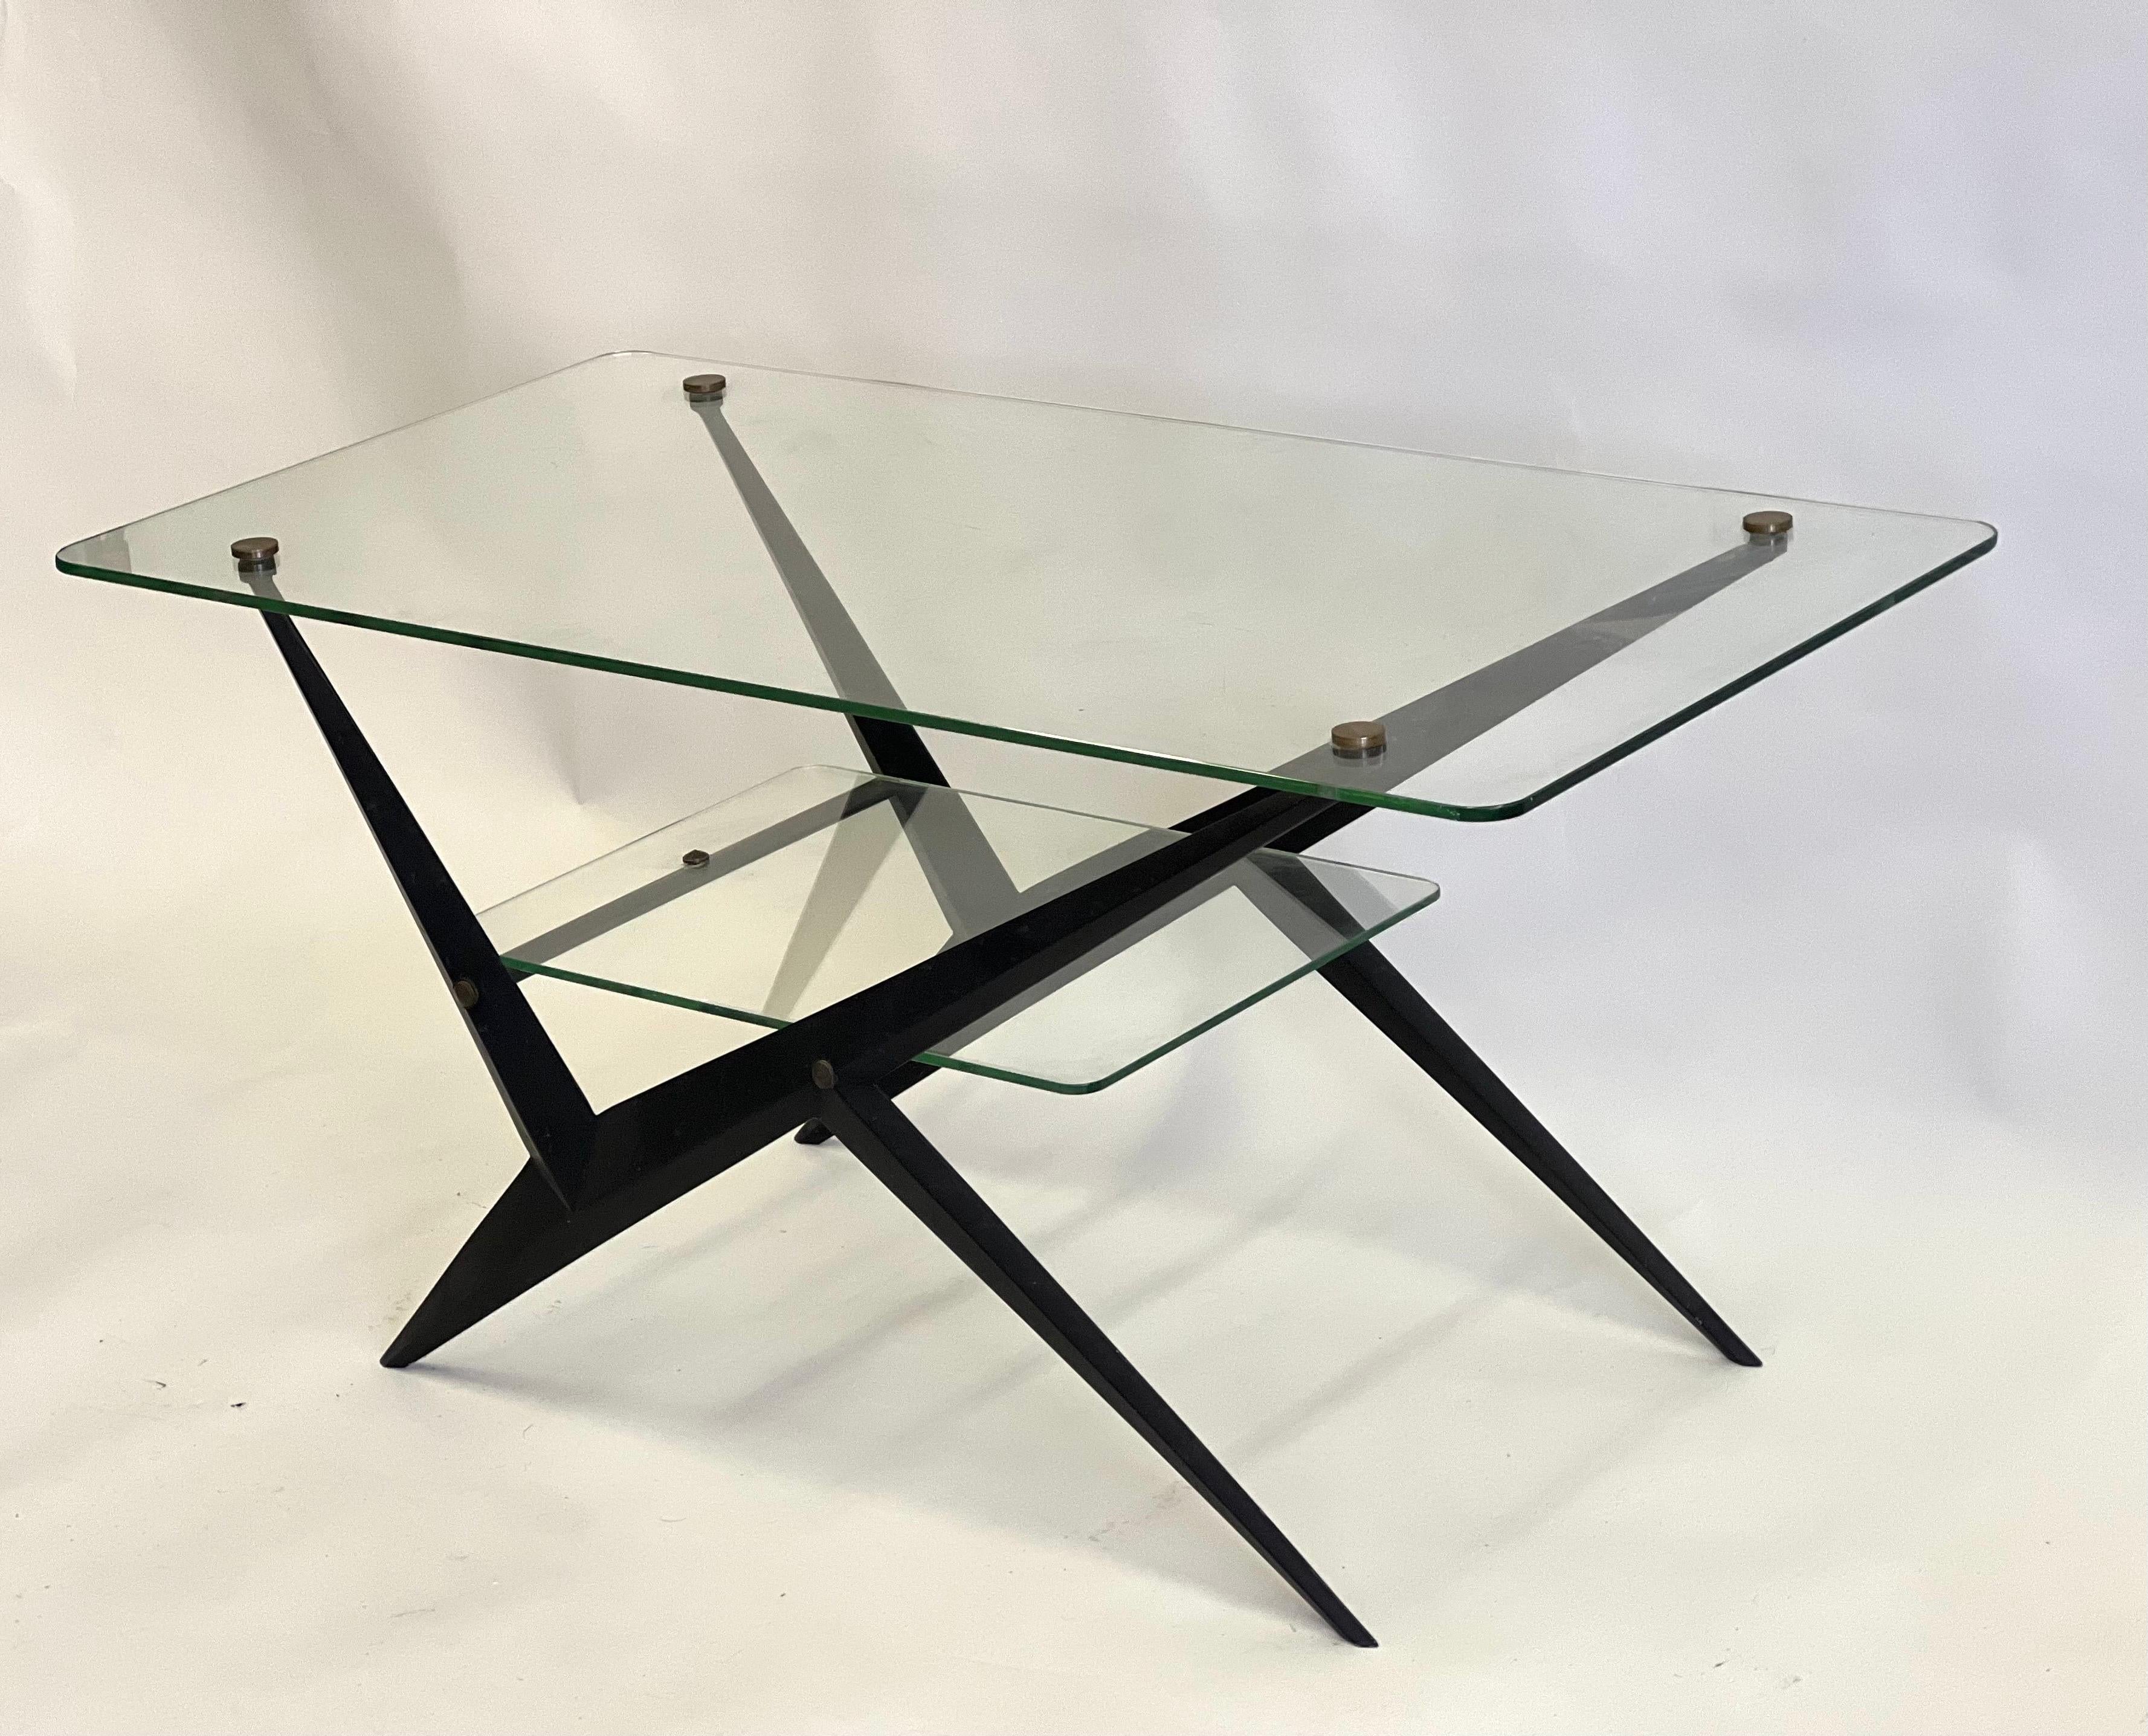 Elegant and Stylish Italian Mid-century Modern Side or End Tables in the style of Giacomo Balla and Ico Parisi and designed by Angelo Ostuni. Each table has a daring architectural structure that is angled and conveys speed and movement typical of